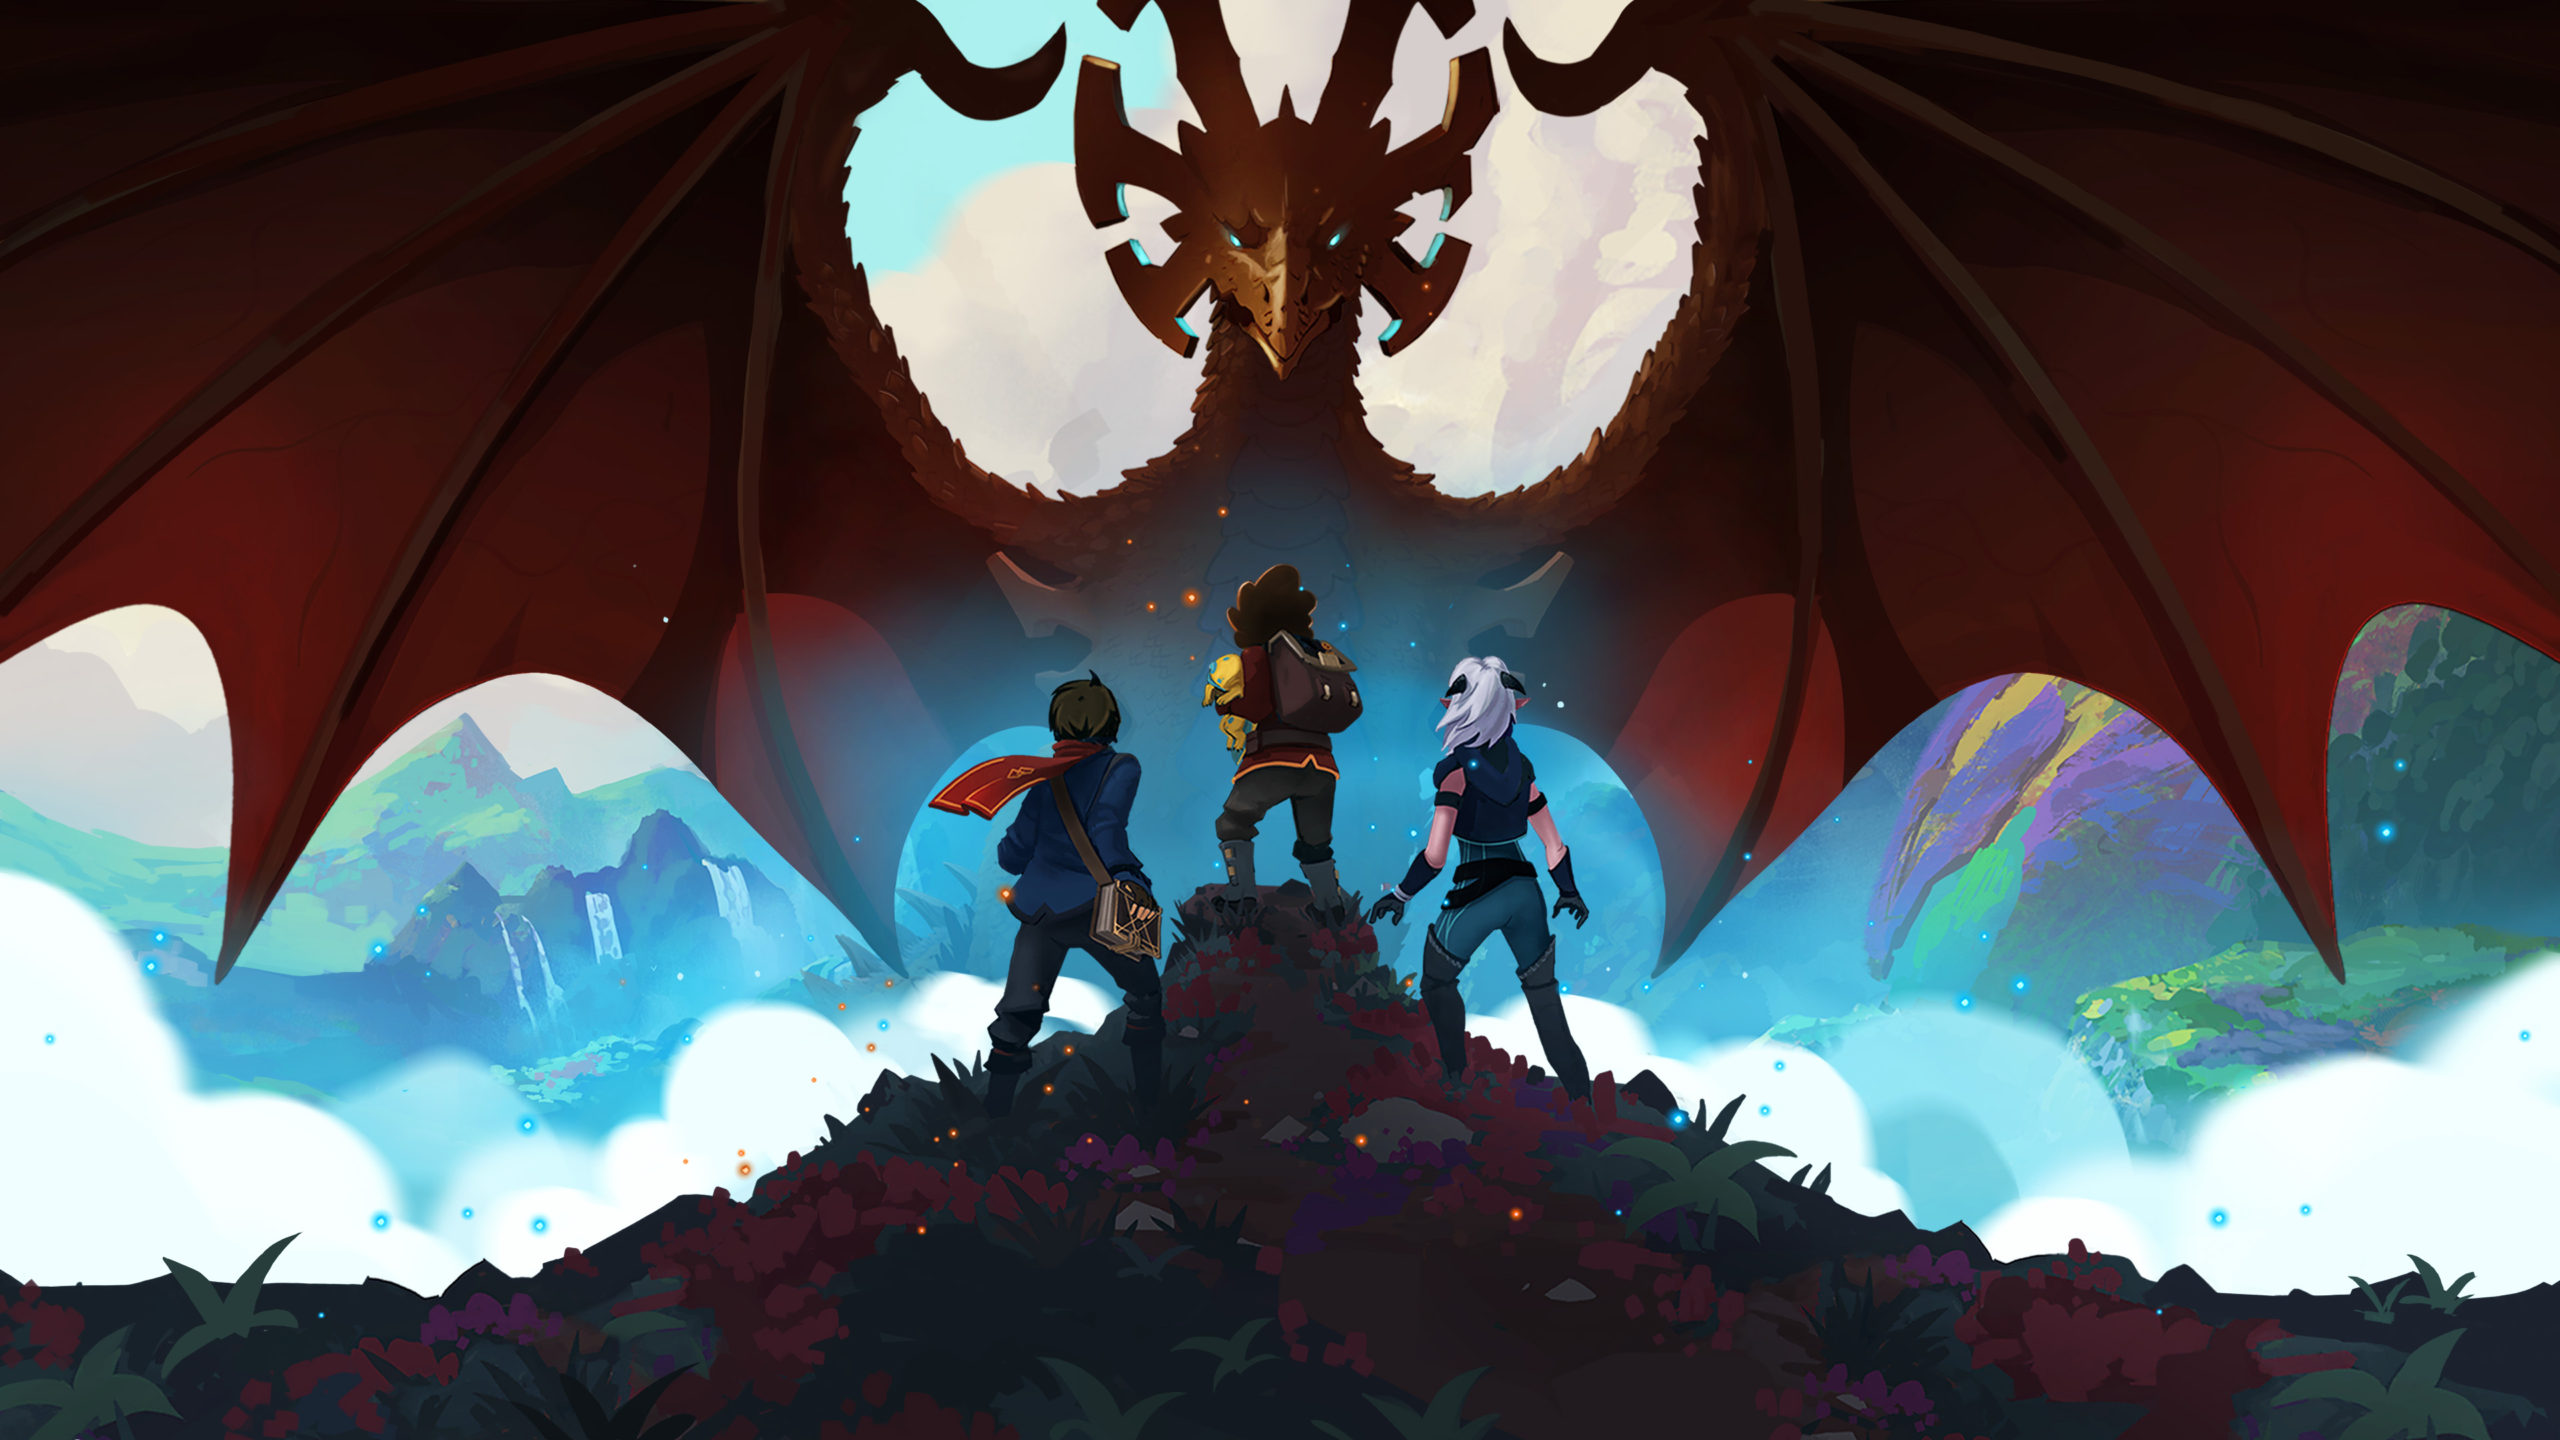 Art for The Dragon Prince, in which the main characters stand before an imposing red dragon.